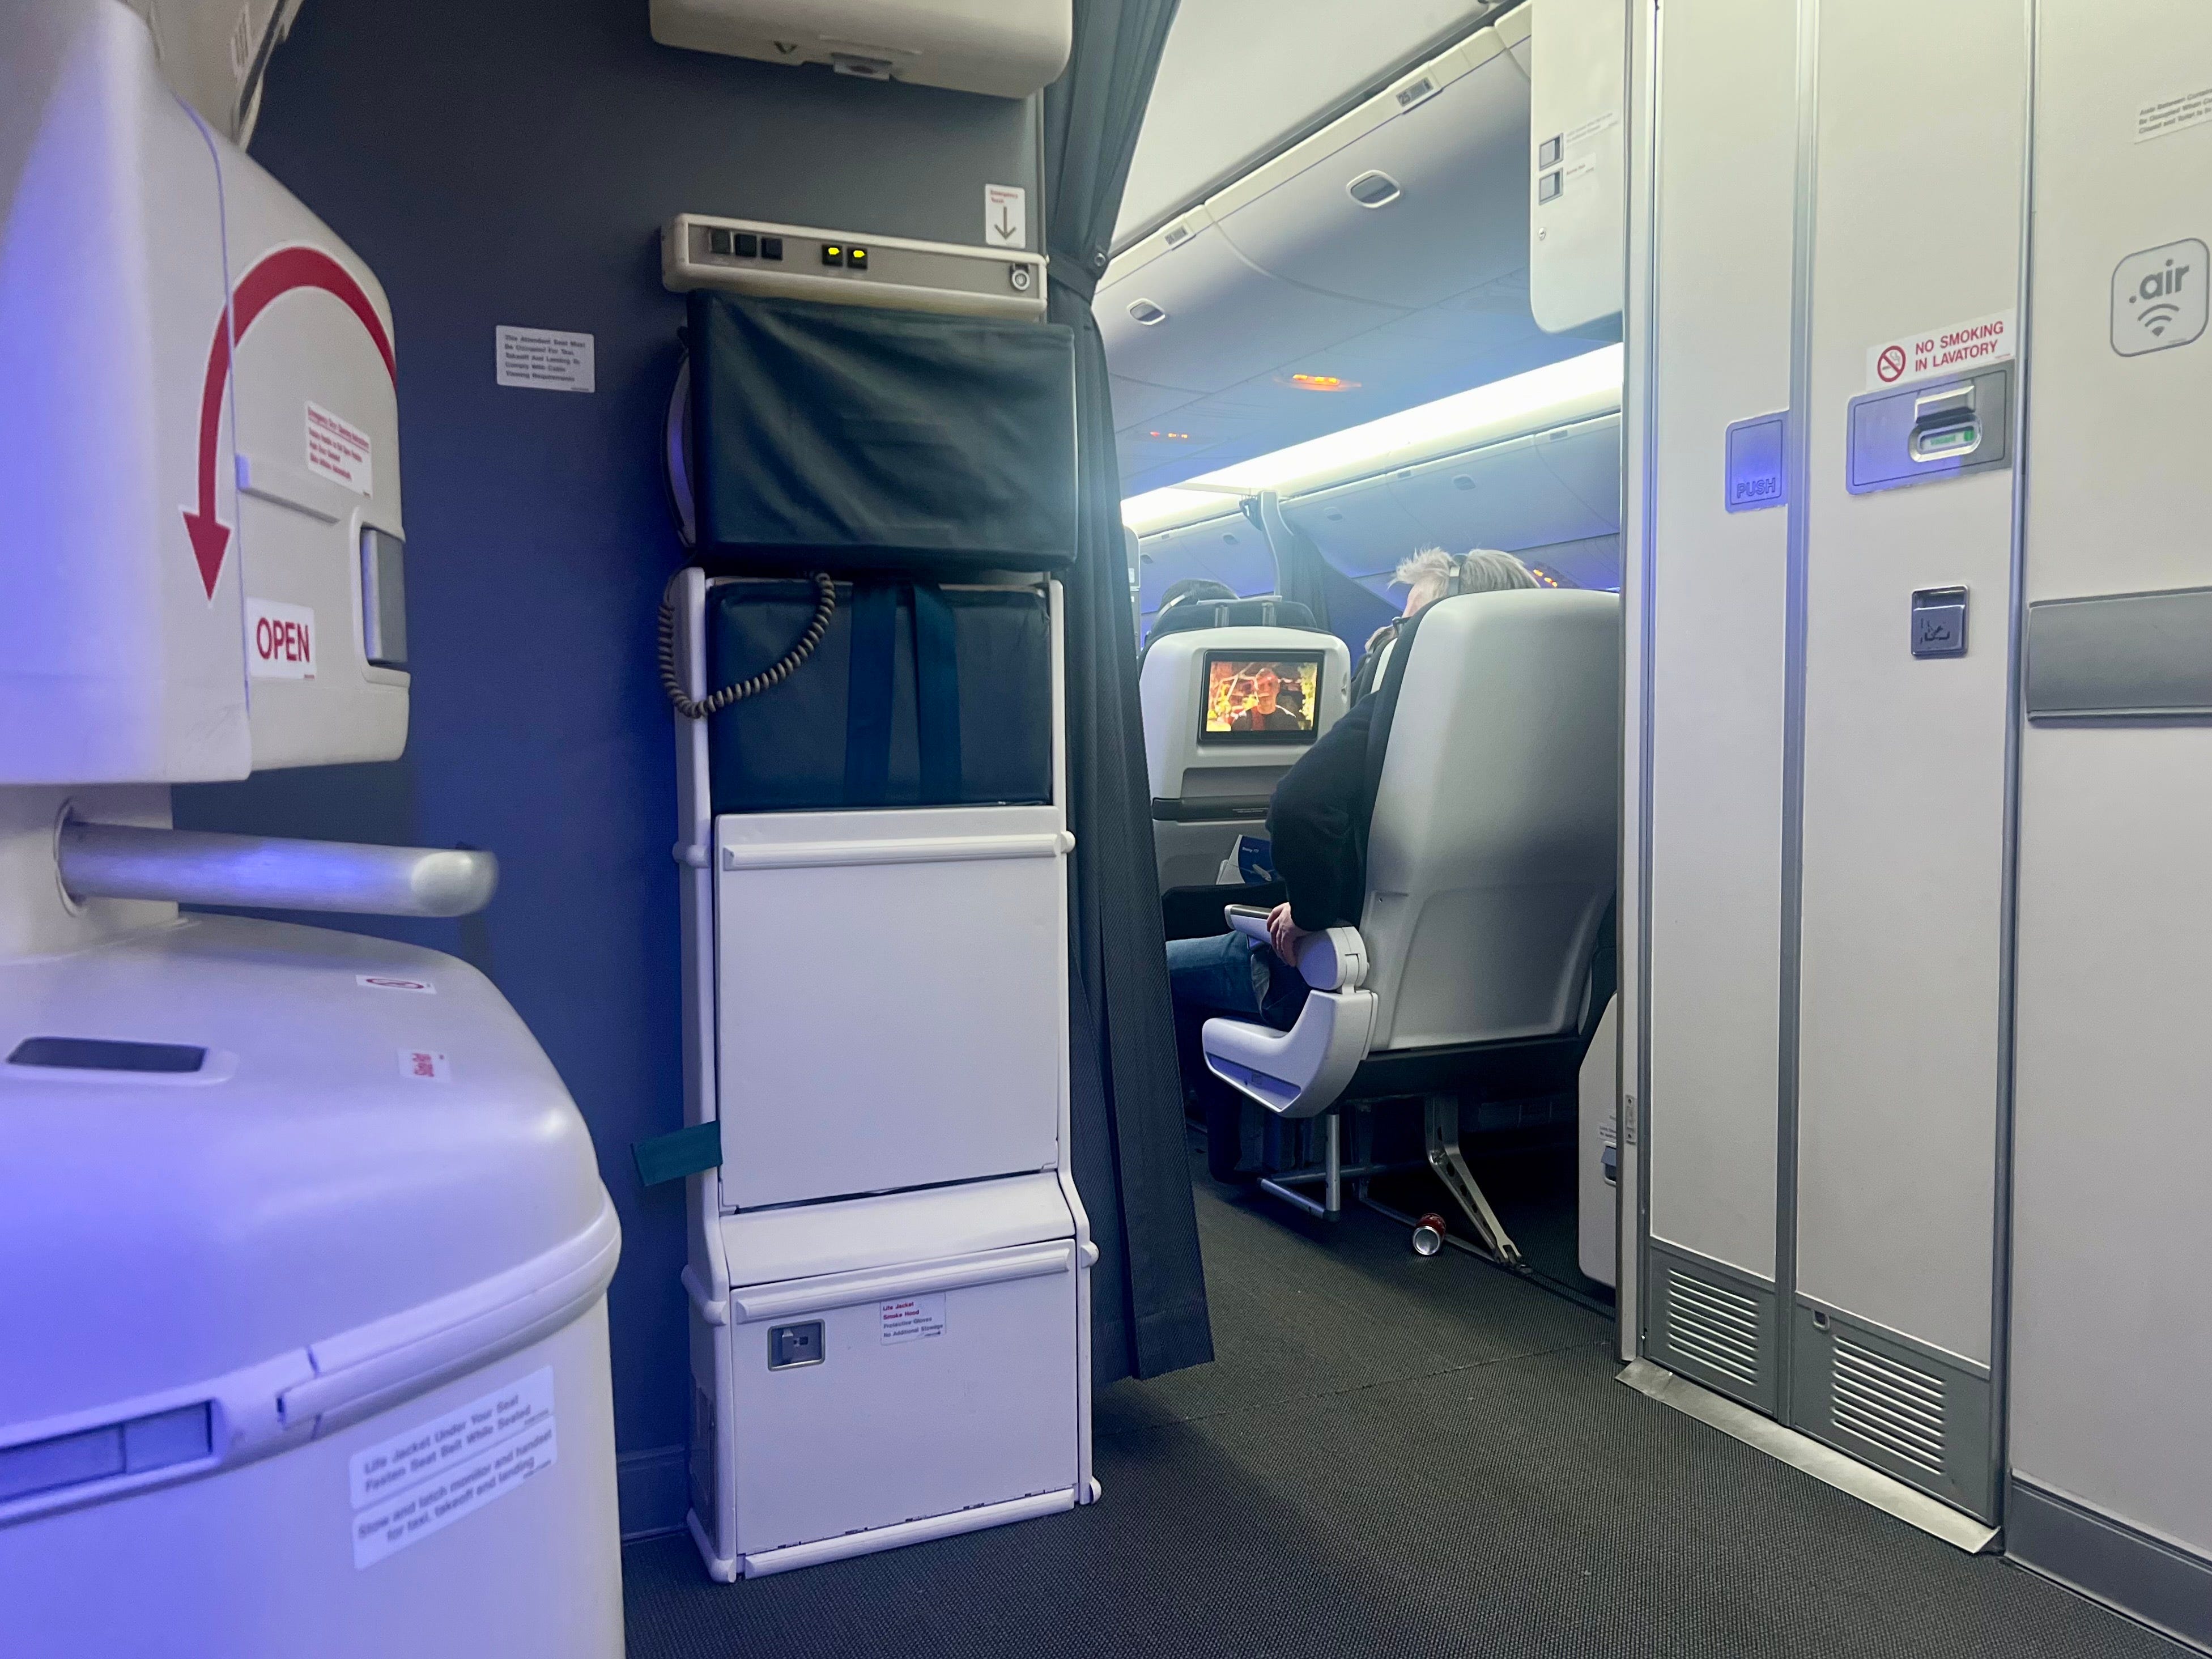 <p>I wouldn't choose 26A myself. But I did like that I could get up from the exit row seat to use the lavatory without disturbing my neighbors.</p>